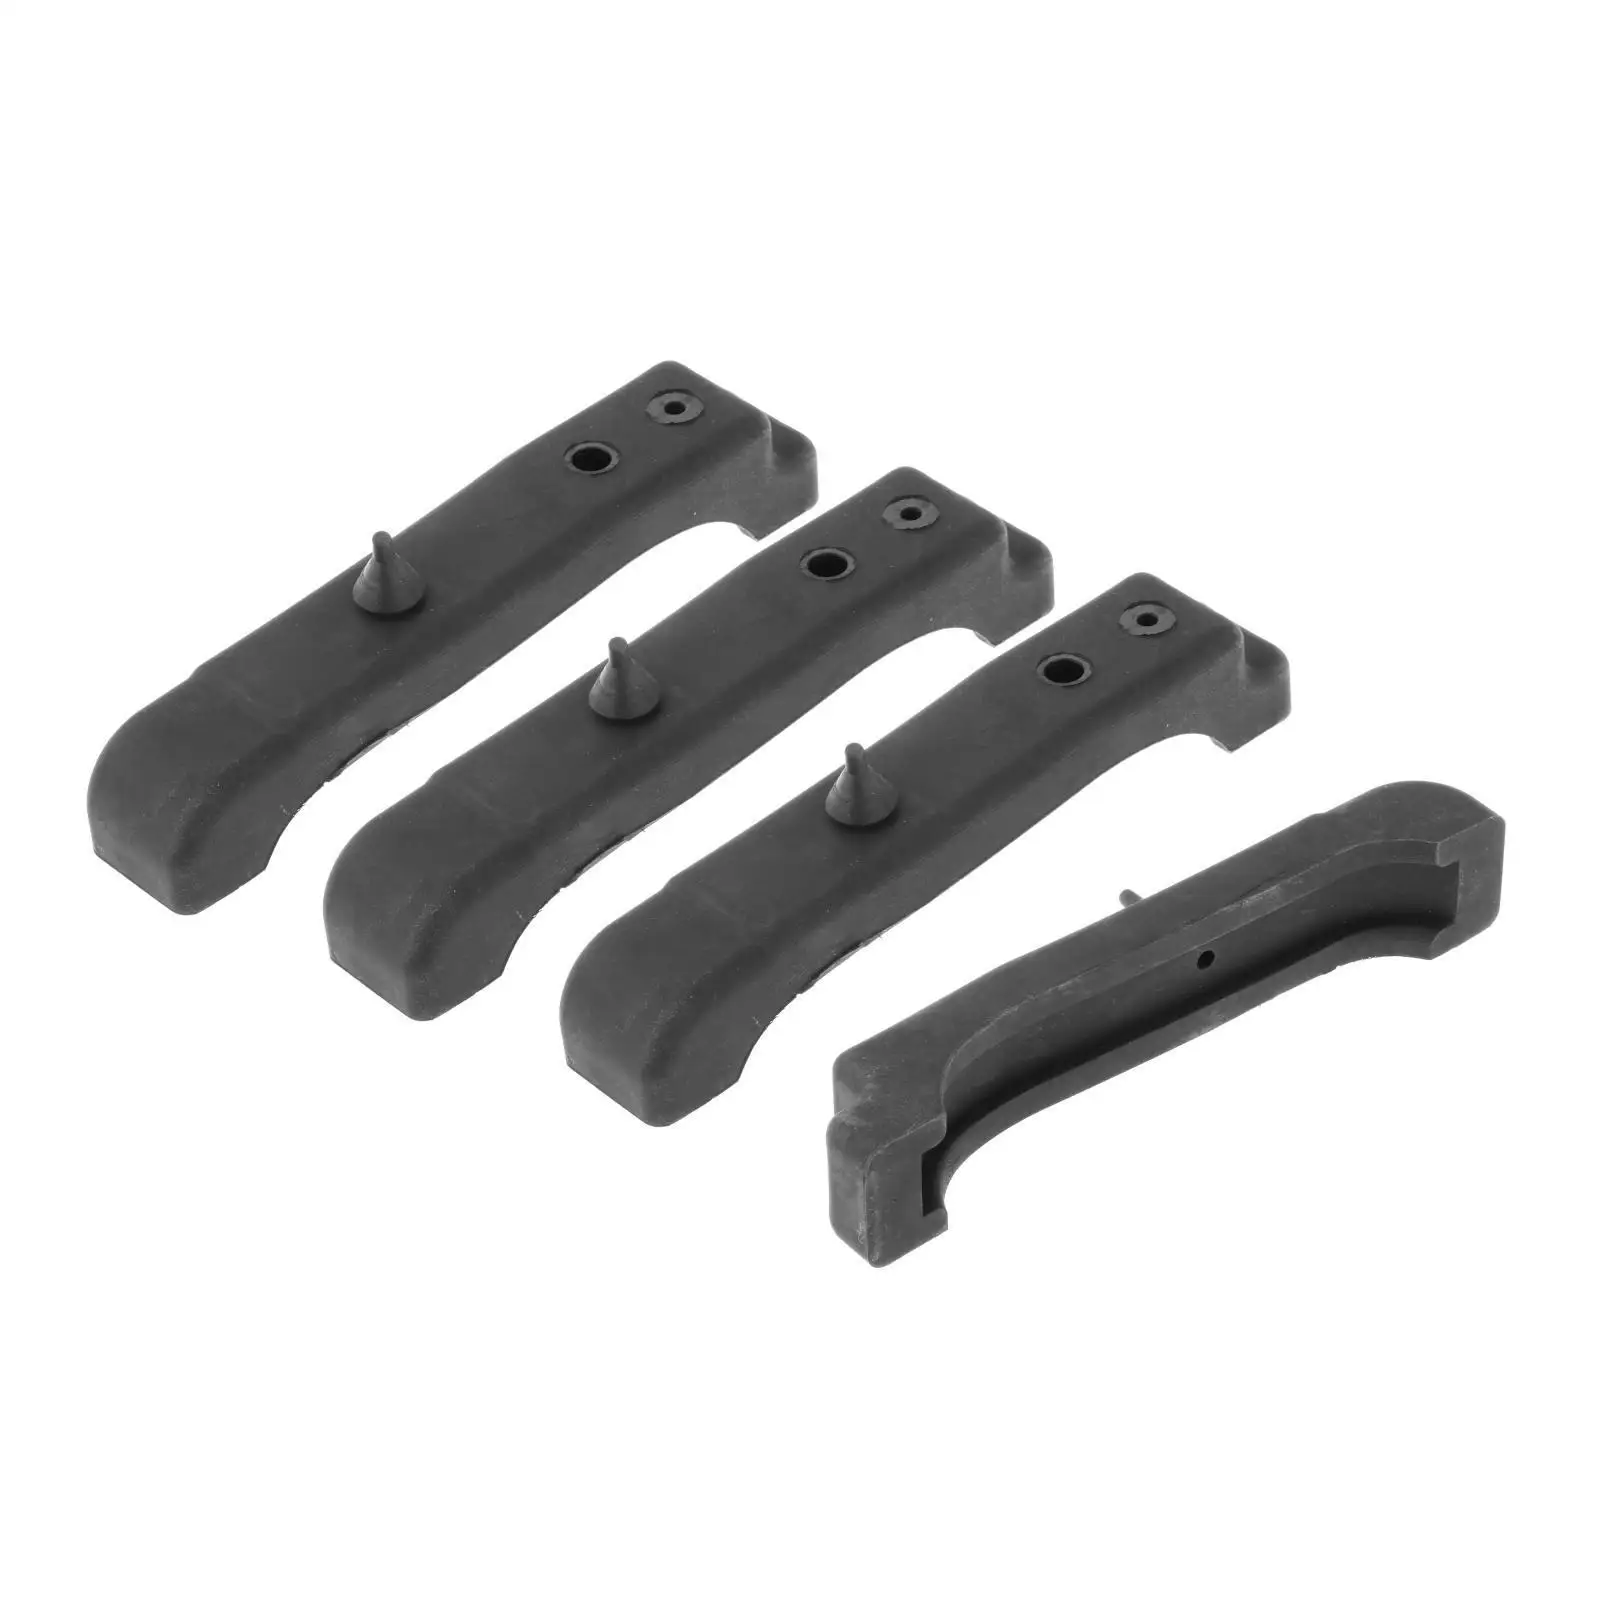 4x Cars Rubber 4 Core Radiator Mounting Cushions Support Pads, Fit for GM 1968-1981 4012-326-682S, Black